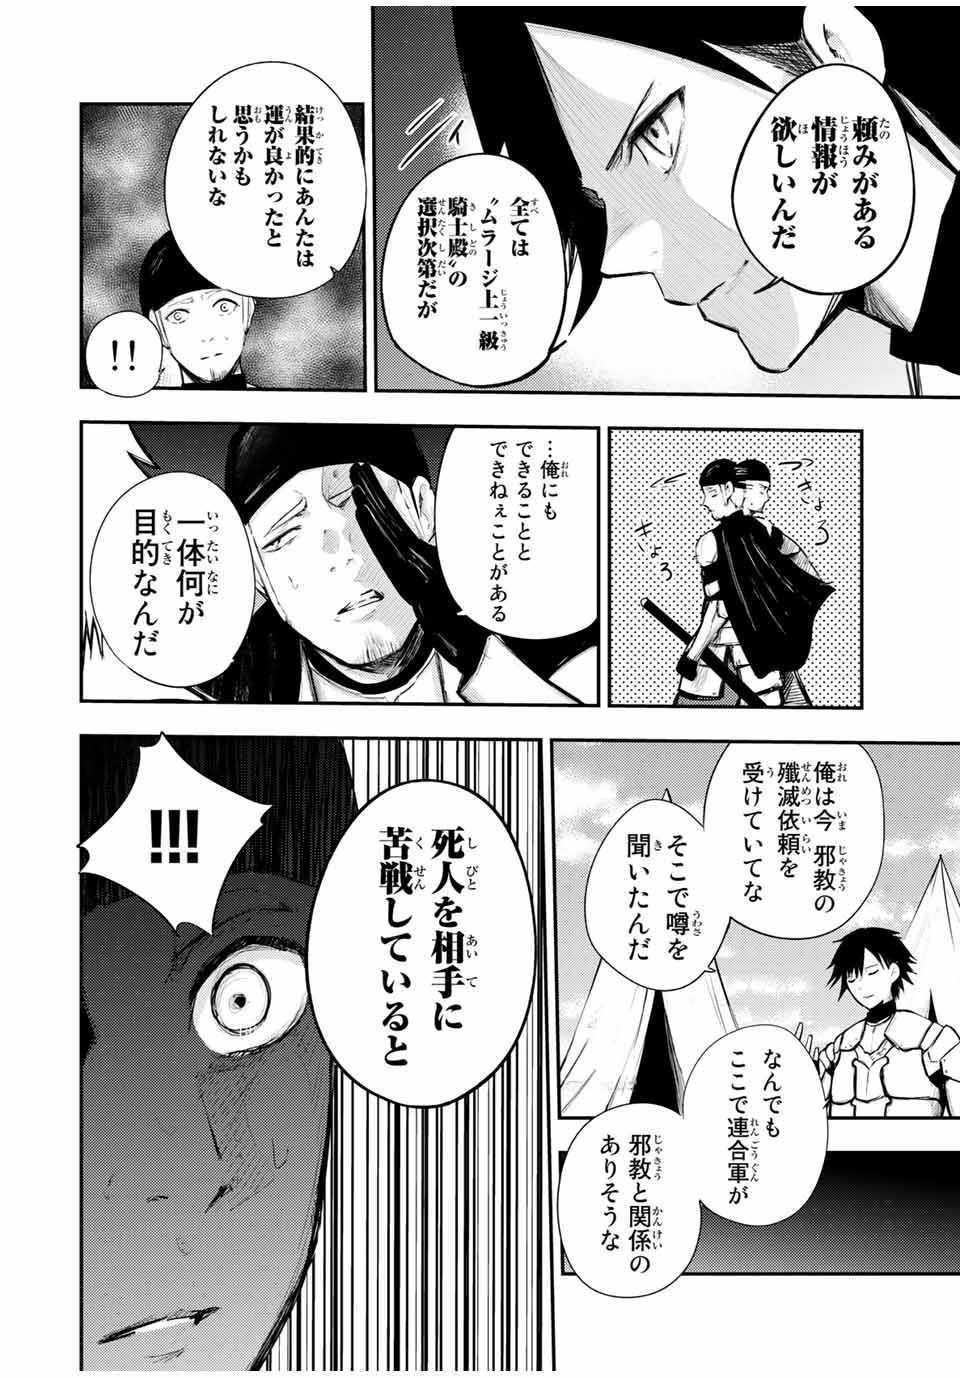 the strongest former prince-; 奴隷転生 ～その奴隷、最強の元王子につき～ 第27話 - Page 14